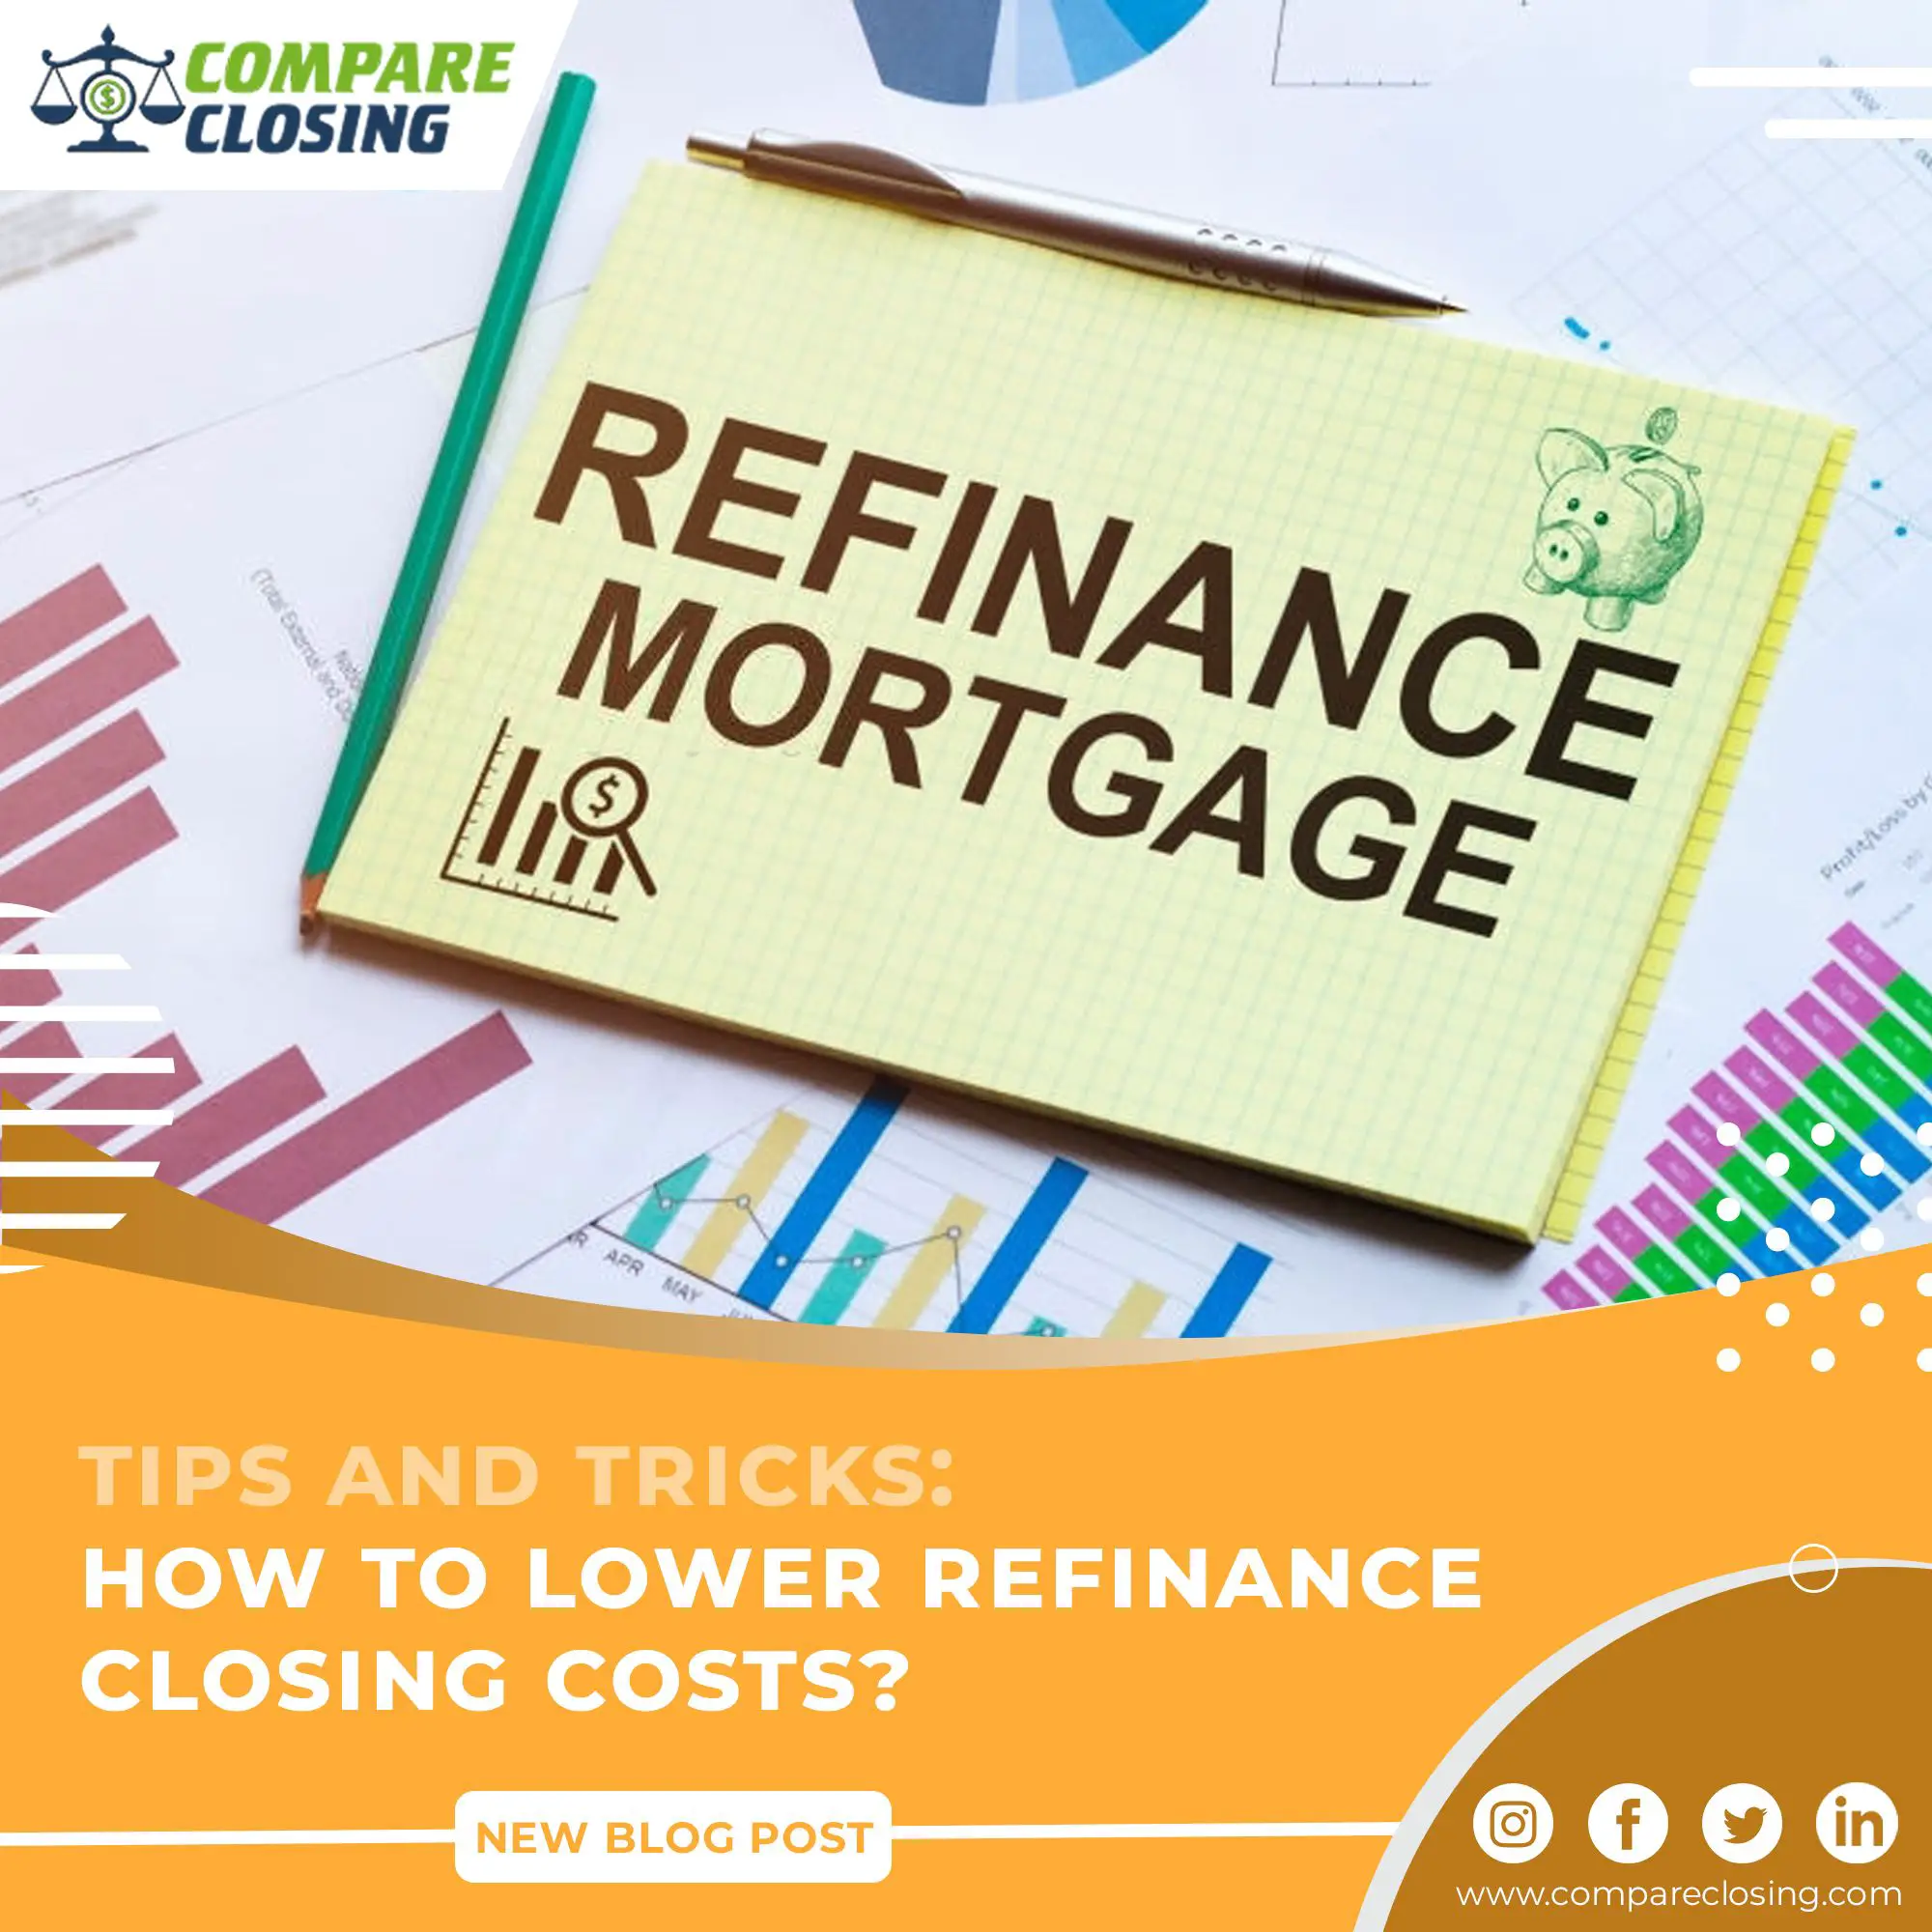 Tips and Tricks to Lower Refinance Closing Costs. in 2021